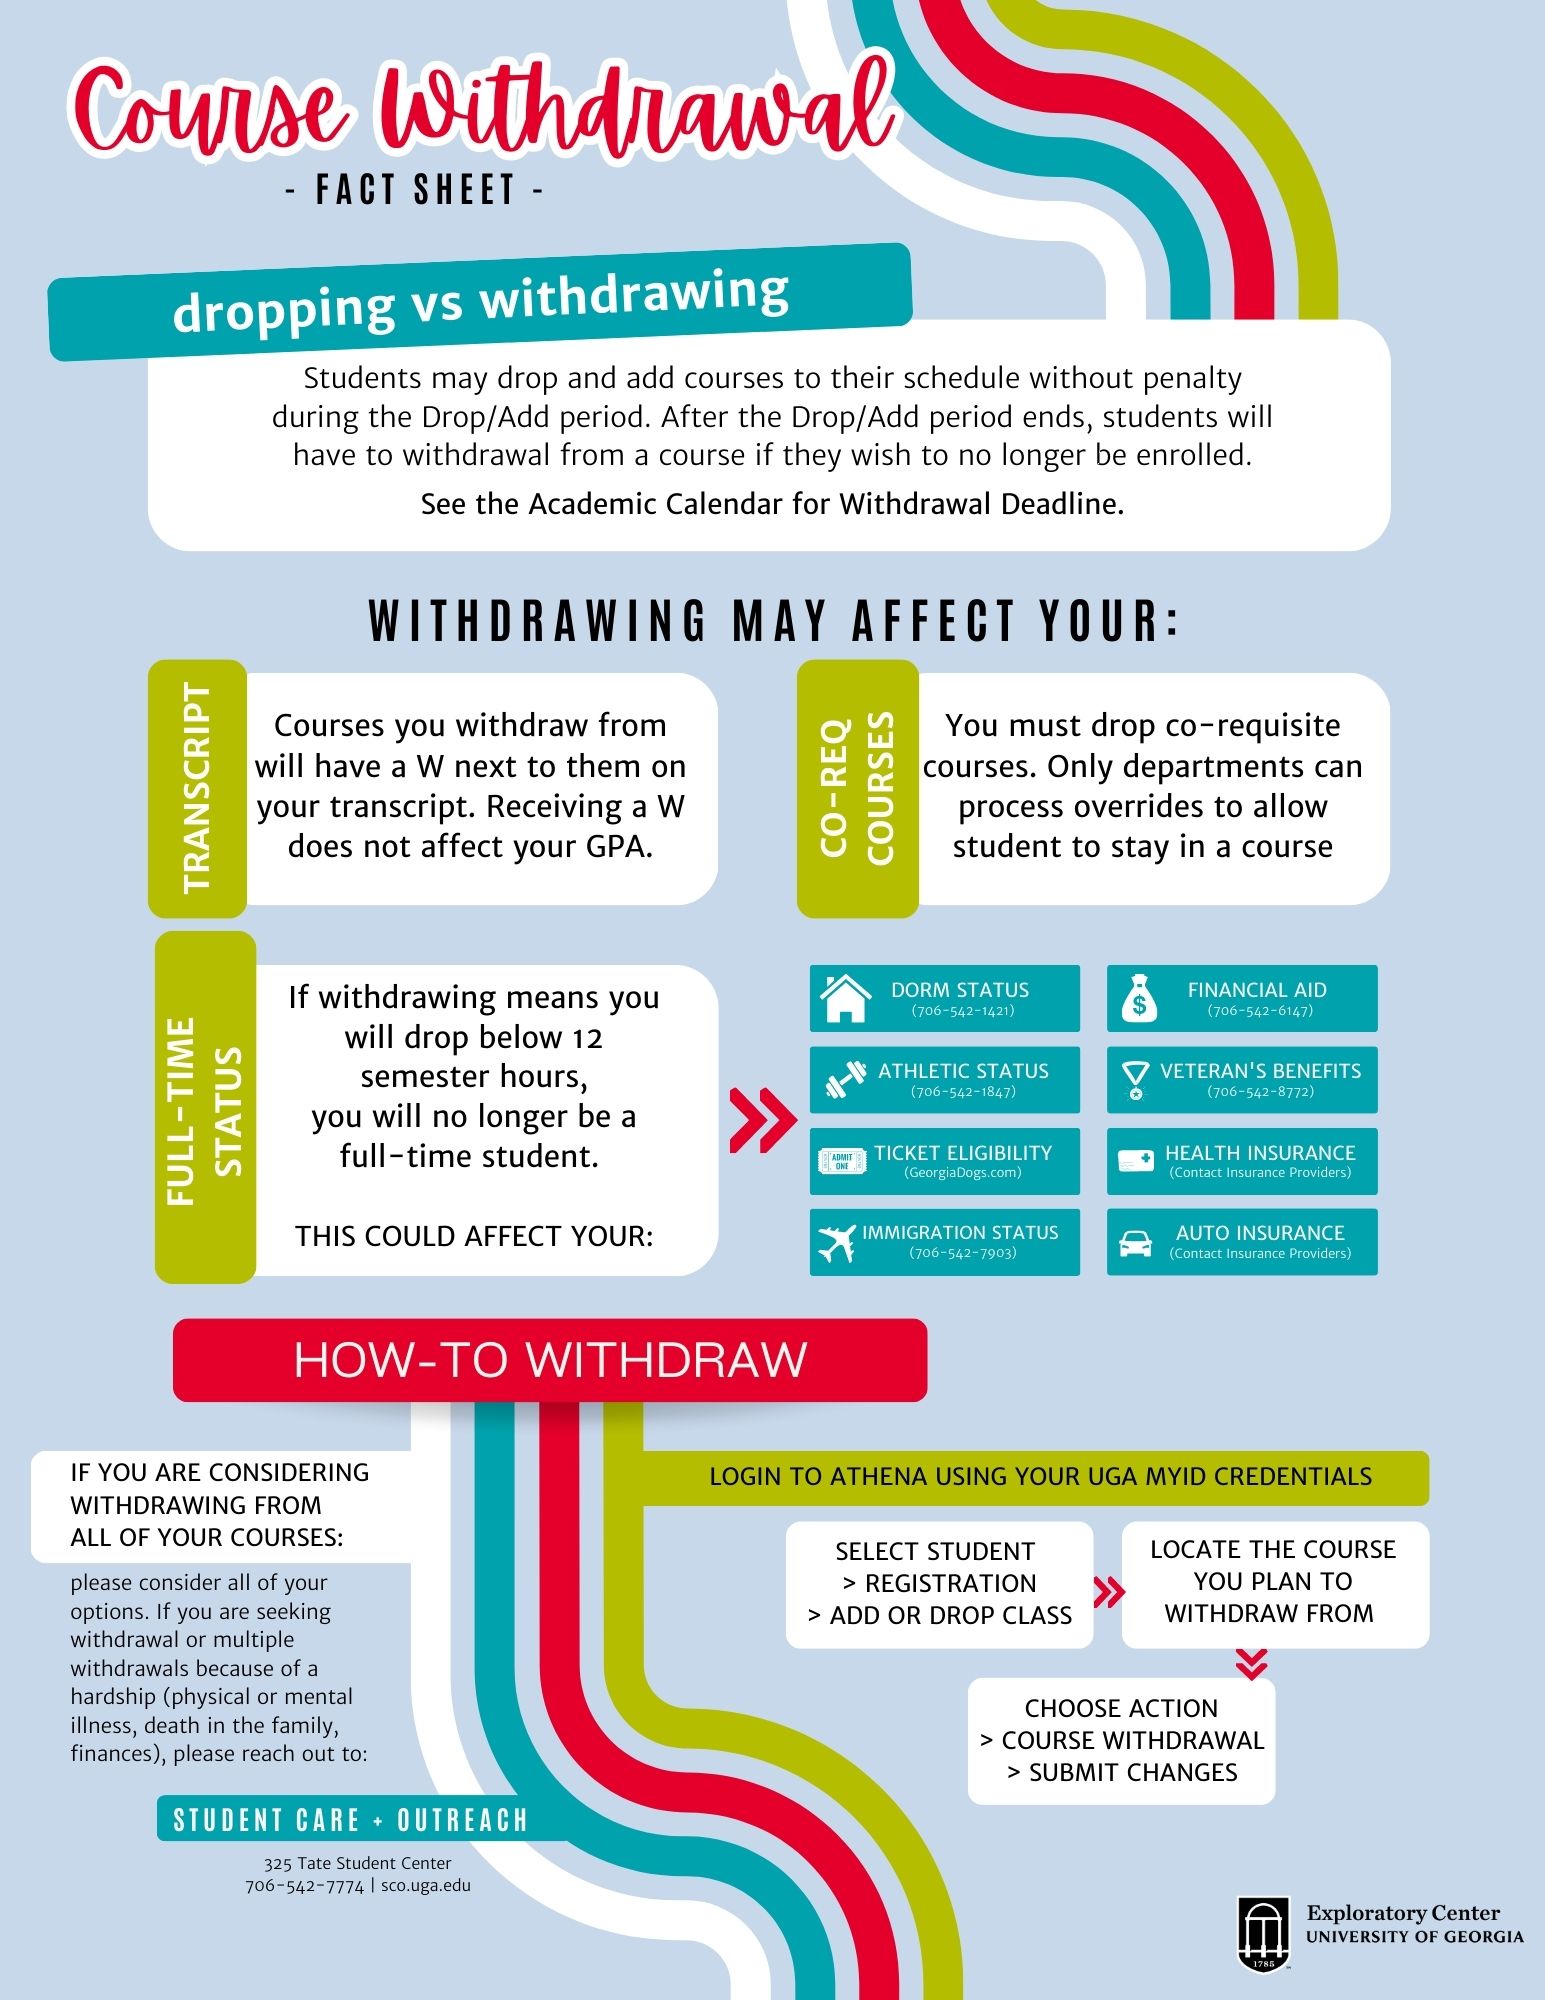 The Course Withdrawal Fact Sheet is a guide that explains how withdrawing from a course can affect a student while at UGA.